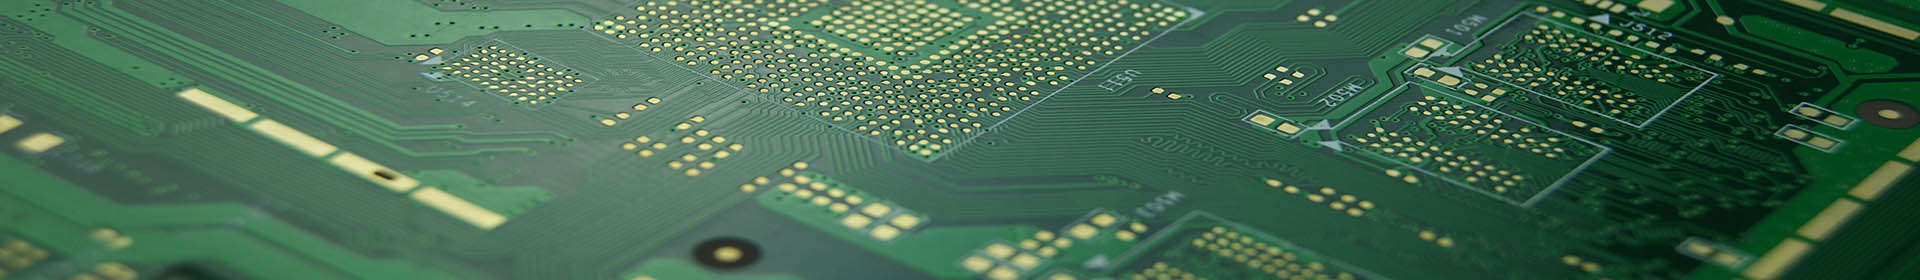 What is HDI PCB technology?